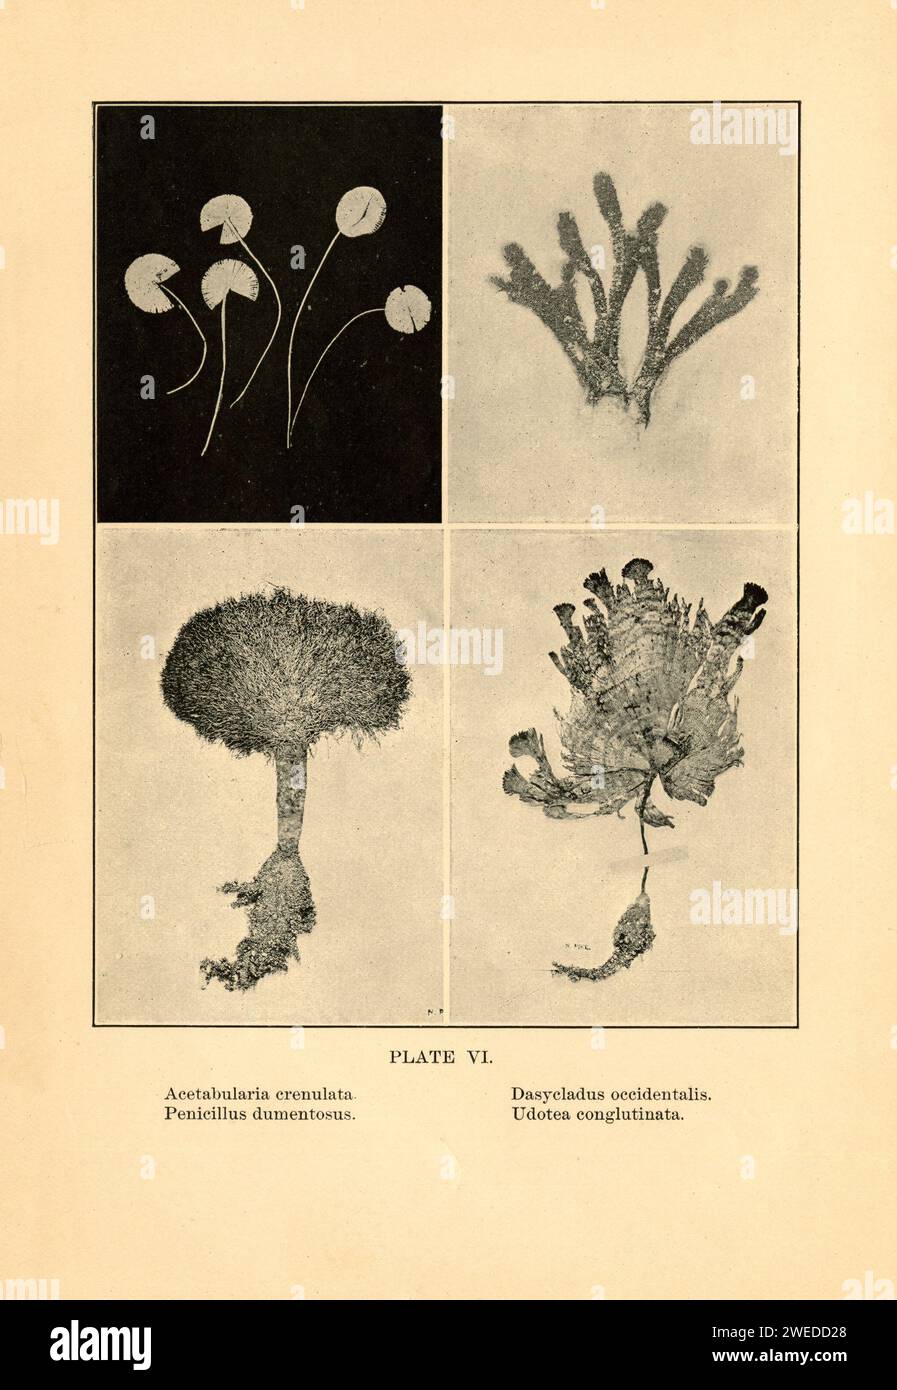 Acetabularia crenulata, Penicillus dumentosus, Dasycladus occidentalis (now Batophora occidentalis), and Udotea conglutinata. From Sea Beach at Ebb Tide, Augusta Foote Arnold, 1901. Two of the images are signed 'N. Pike' Stock Photo